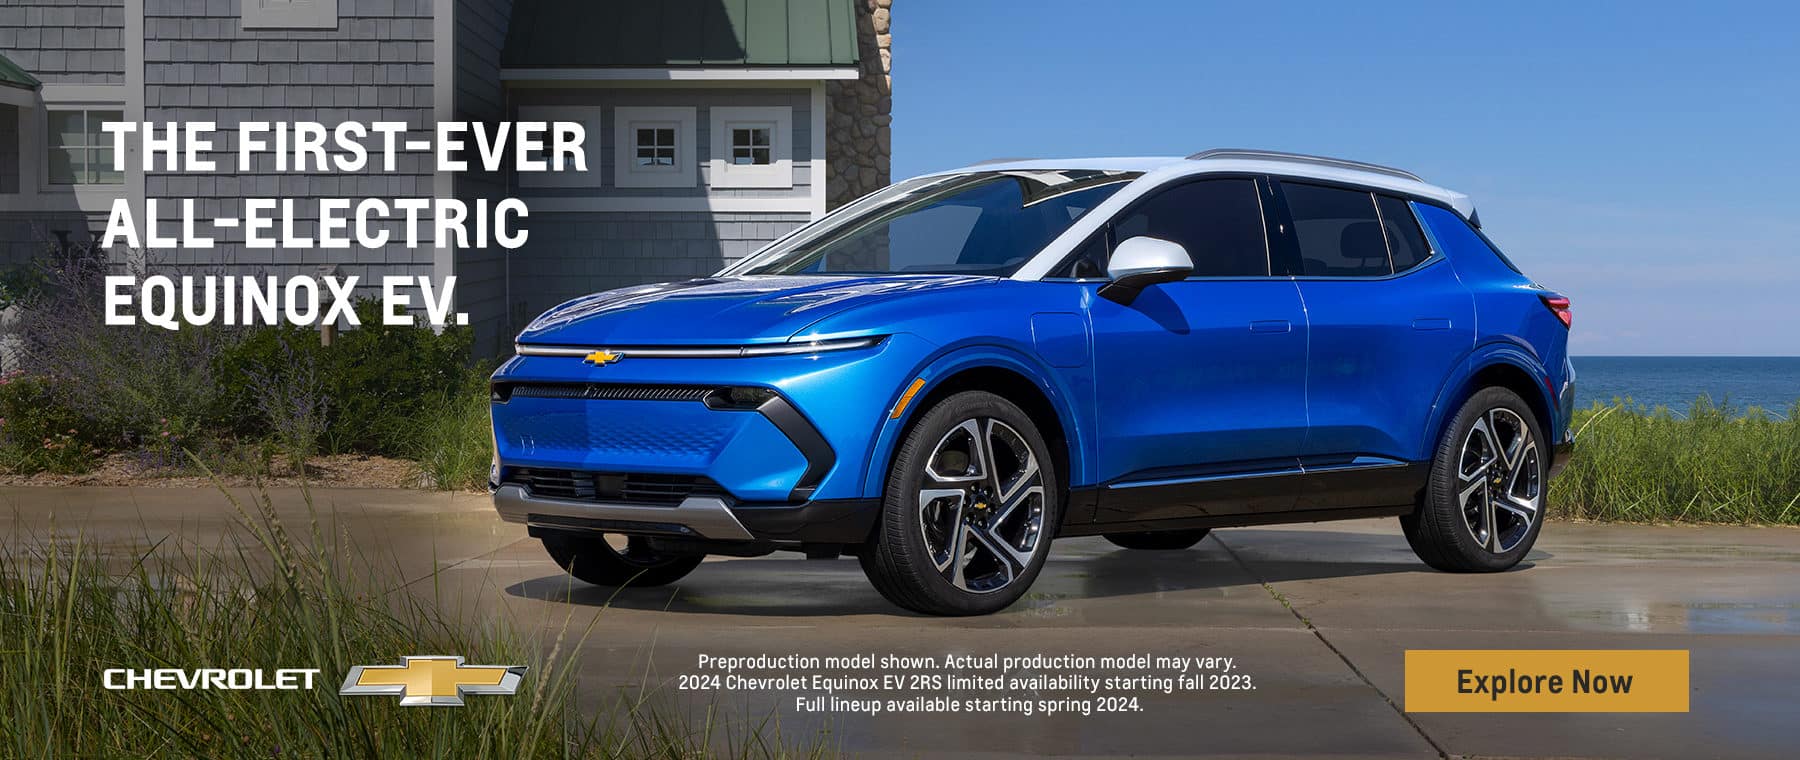 The first-ever all-electric Equinox EV. Preproduction model shown. Actual production model may vary. 2024 Chevrolet Equinox EV 2RS limited availability starting fall 2023. Full lineup available starting spring 2024.